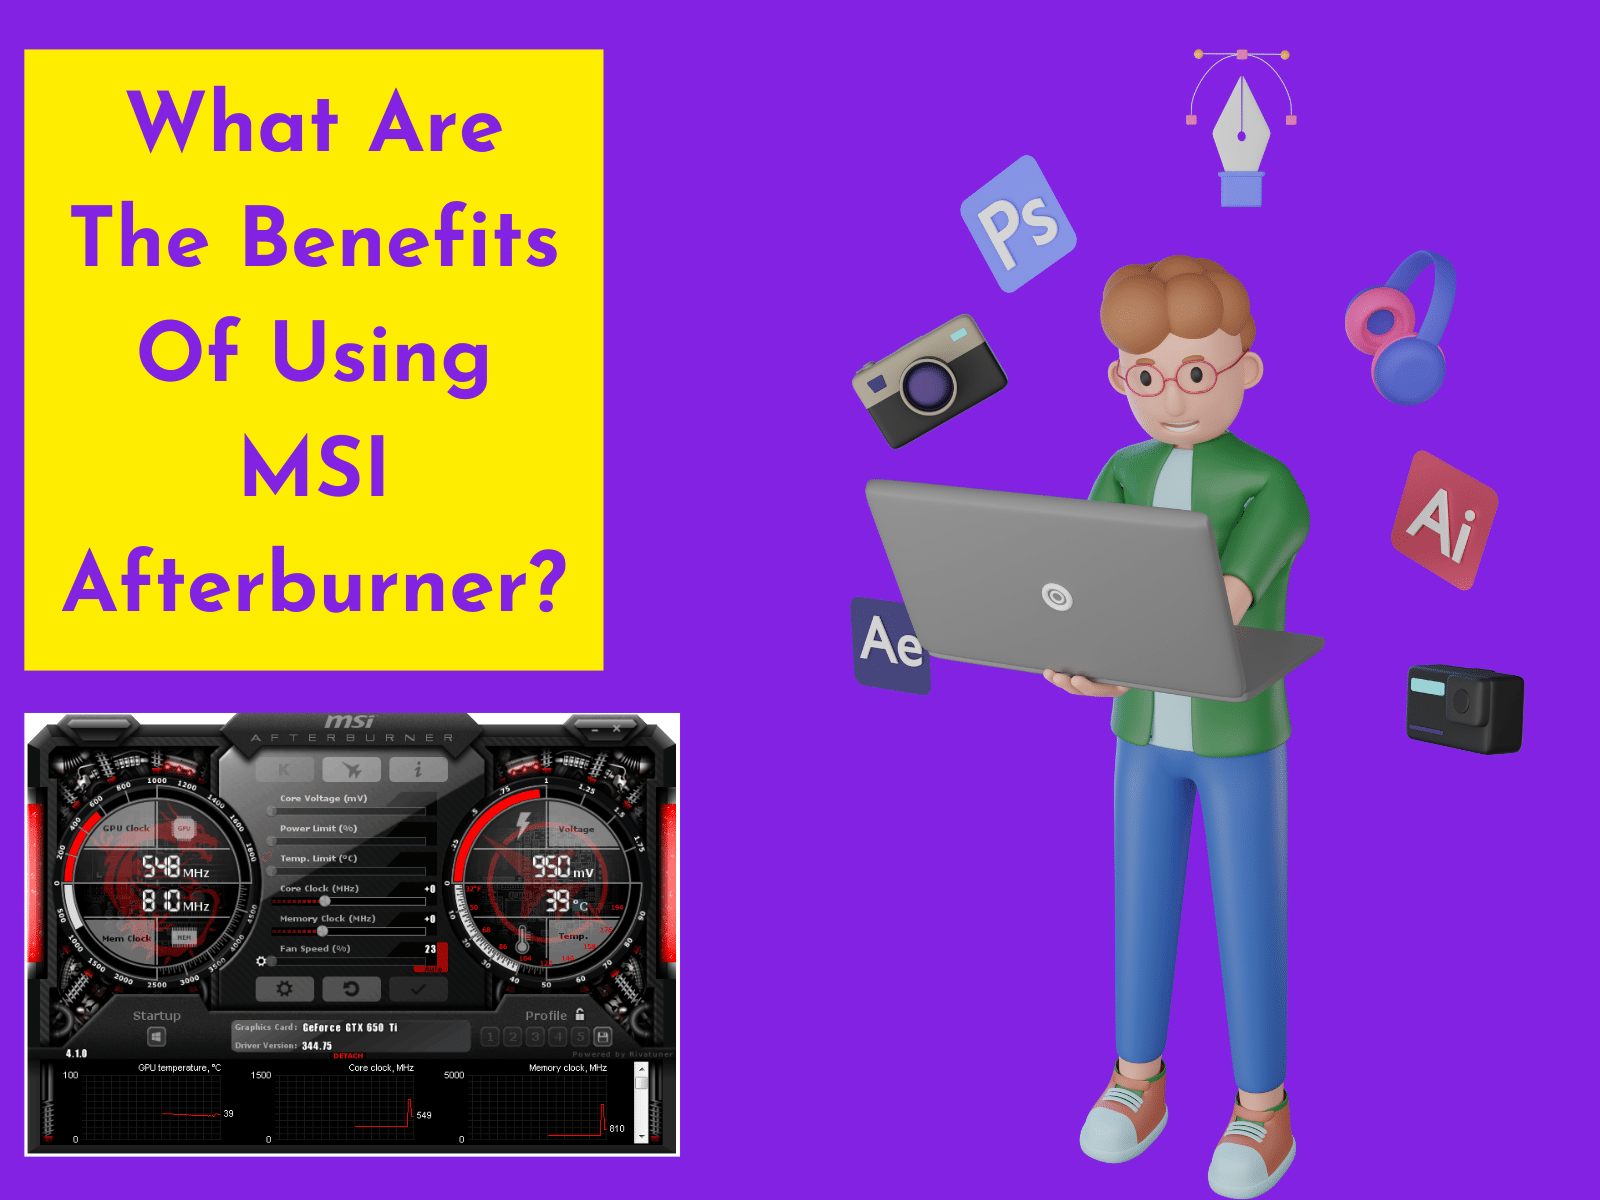 What Are The Benefits Of Using MSI Afterburner